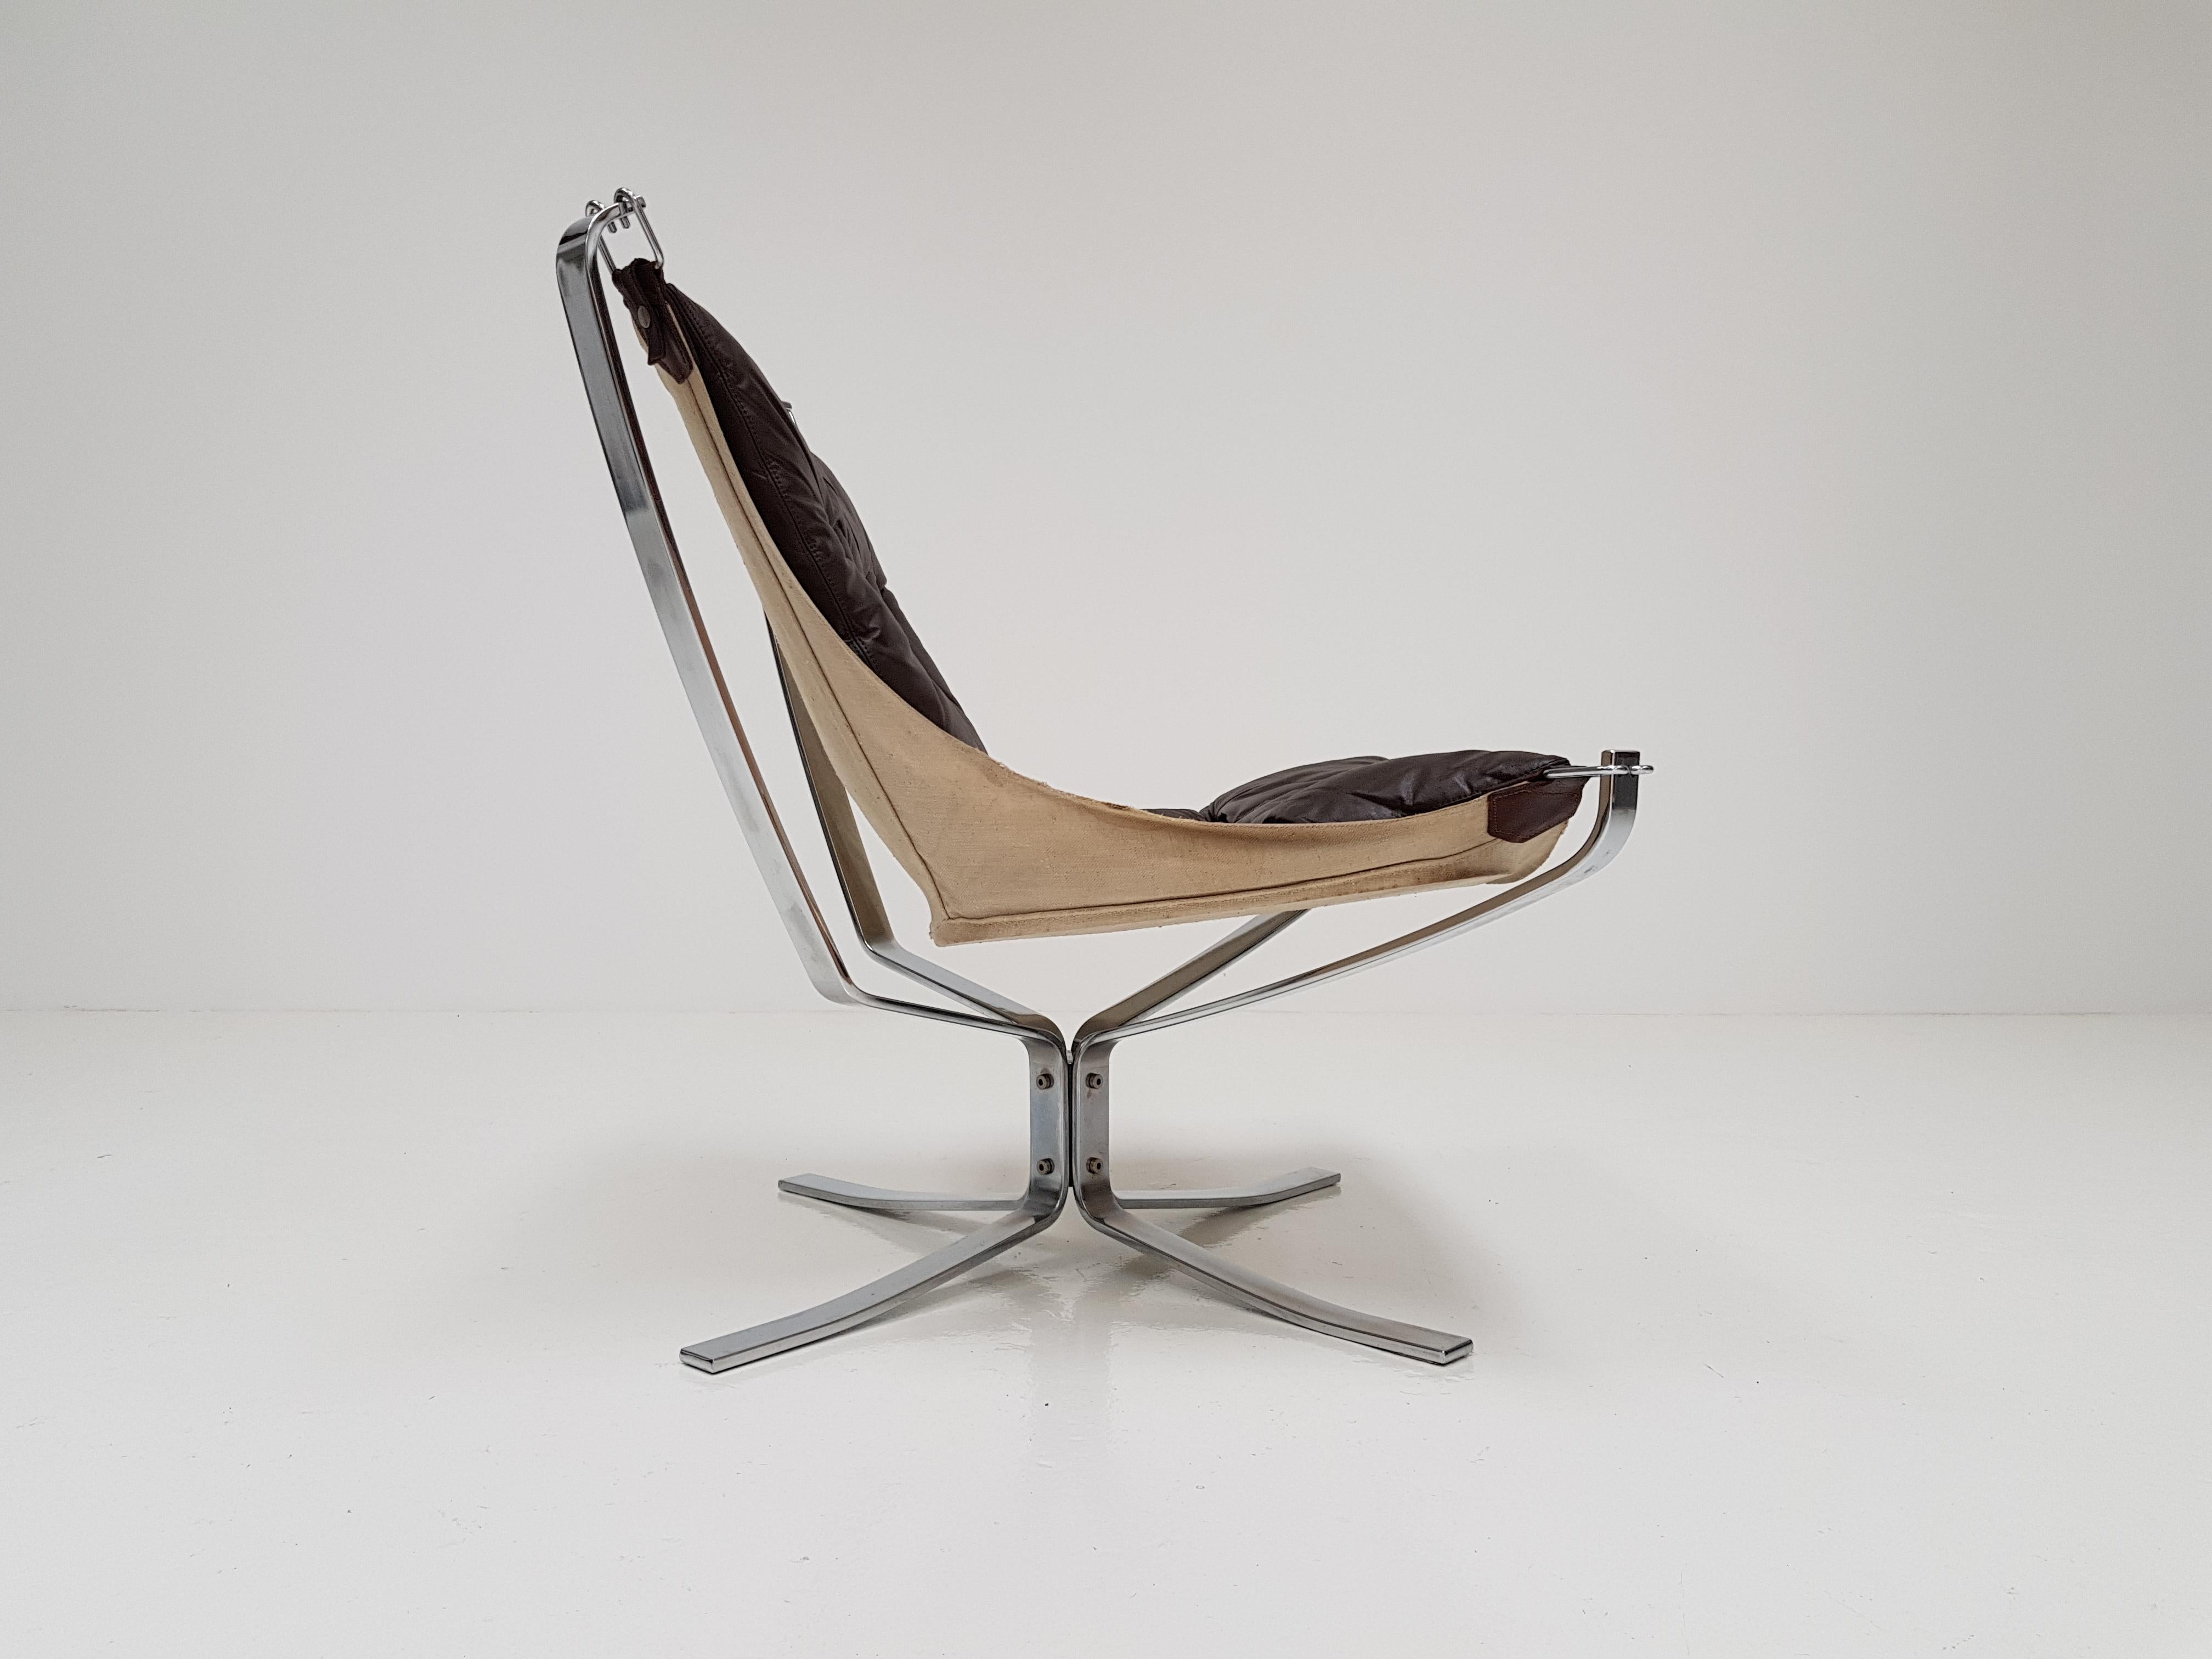 Chrome Based Low-Backed X-Framed Sigurd Ressell Designed 1970s Falcon Chair In Good Condition In London Road, Baldock, Hertfordshire